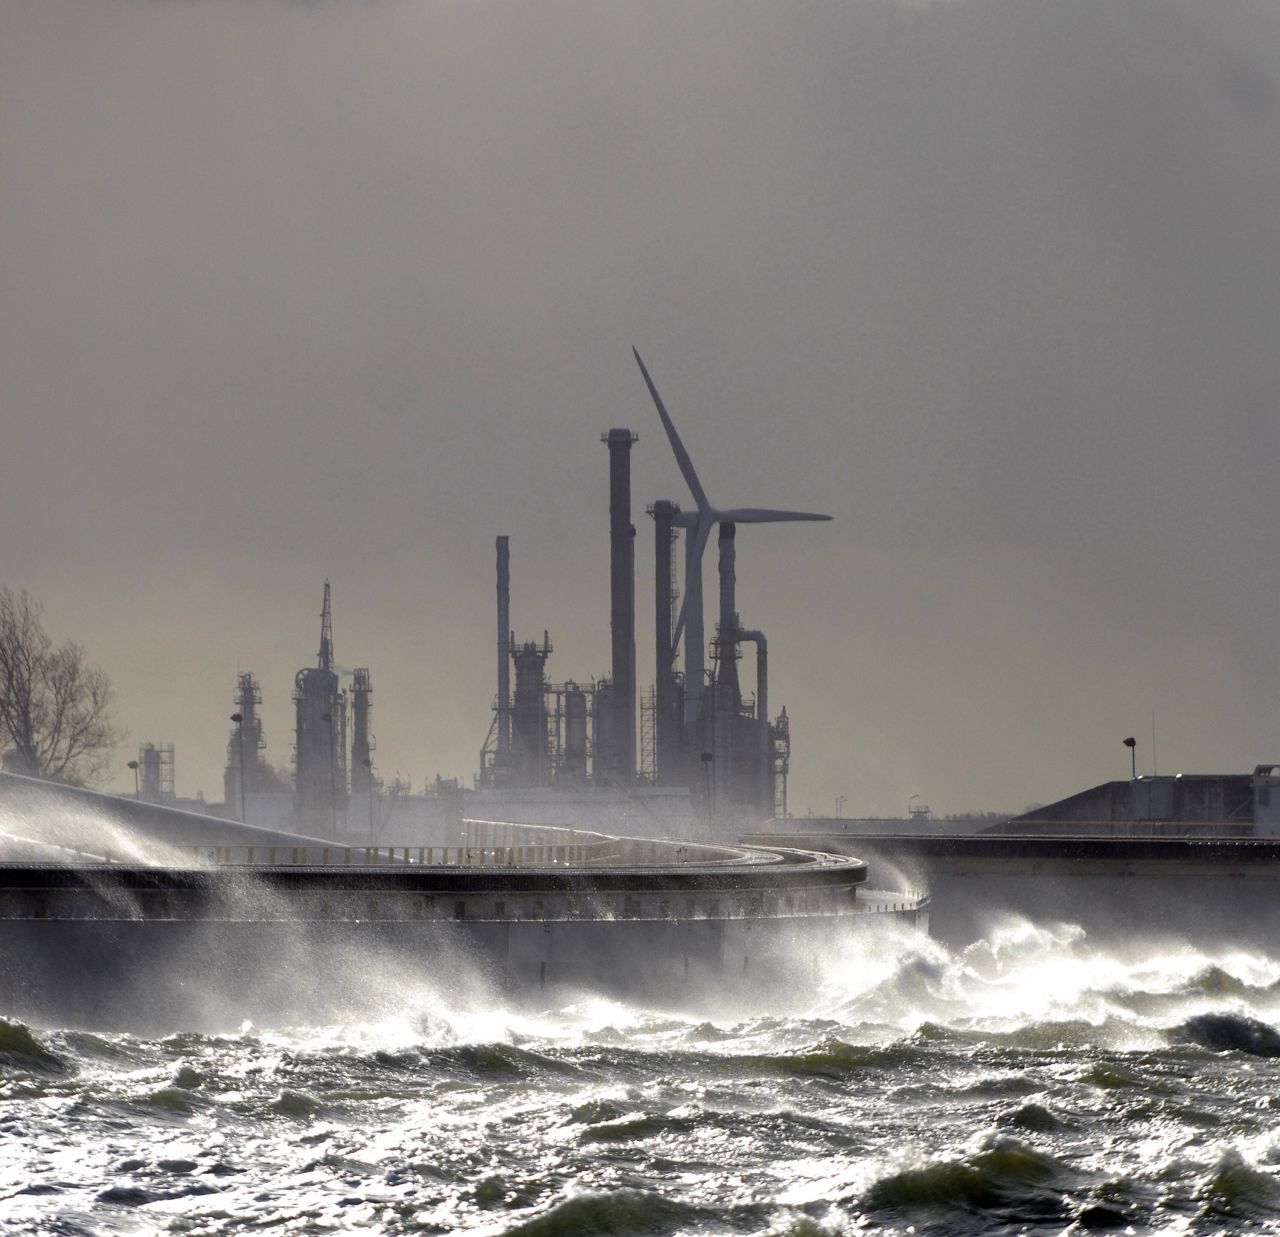 In 2007 the giant Maeslant surge barrier that guards the entrance to the largest port in Europe, Rotterdam closed for the first time since its construction in the 1990s.  According to Jan Corfee-Morlot, other coastal cities such as New York and Miami will soon require similar defences. 